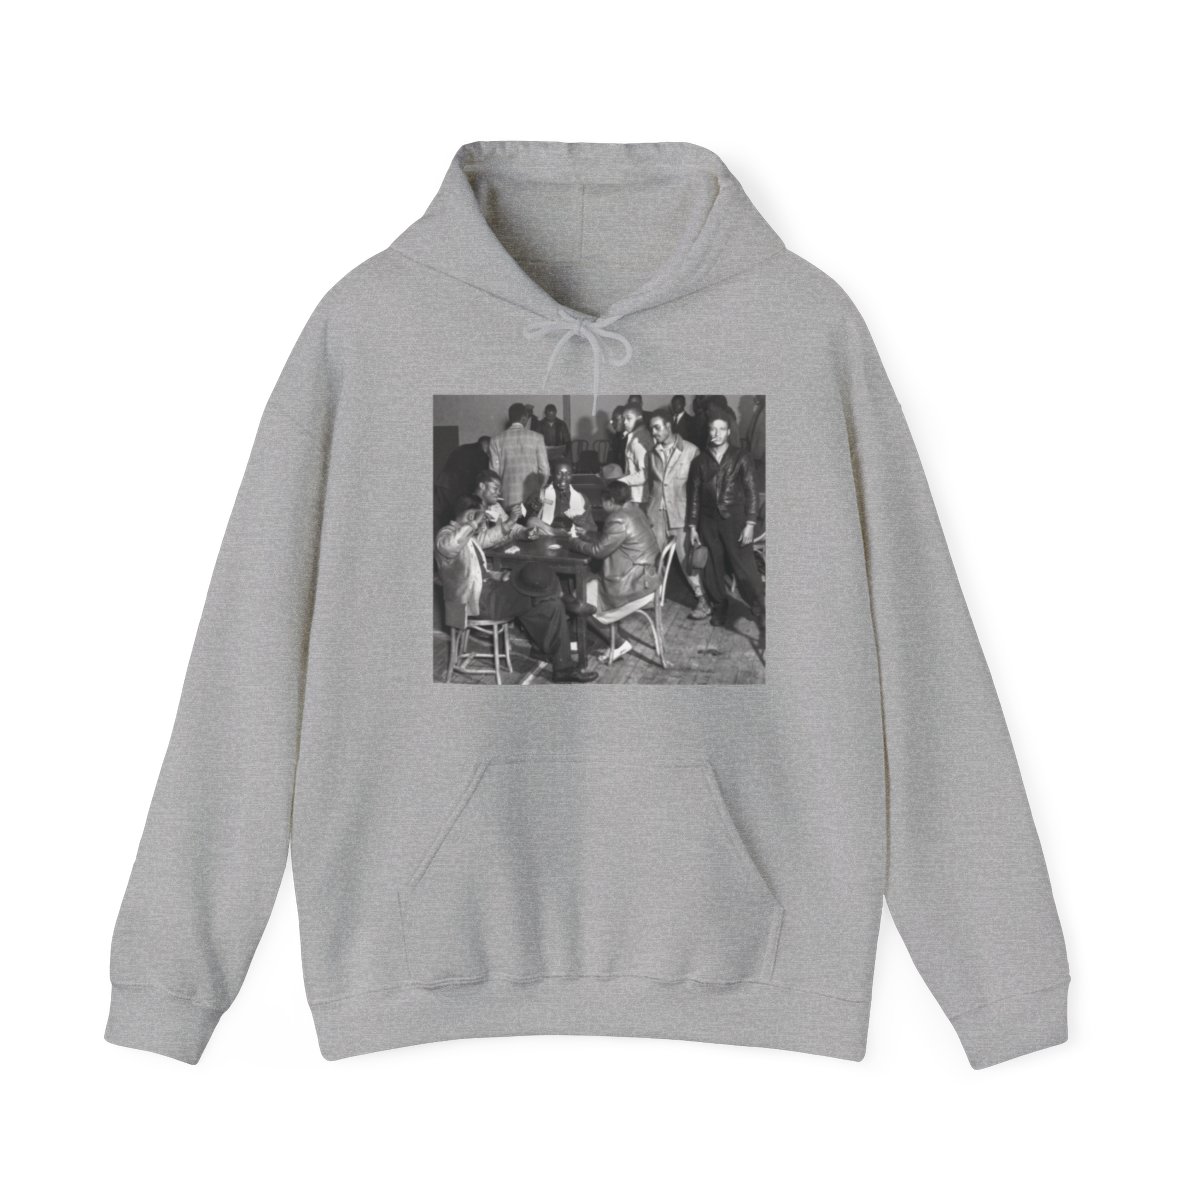 Card Game  Hooded Sweatshirt , Urban Retro Style,  Vintage 1940s Photo , Unique Streetwear Fashion , Gift for Gamblers, Black History  product thumbnail image